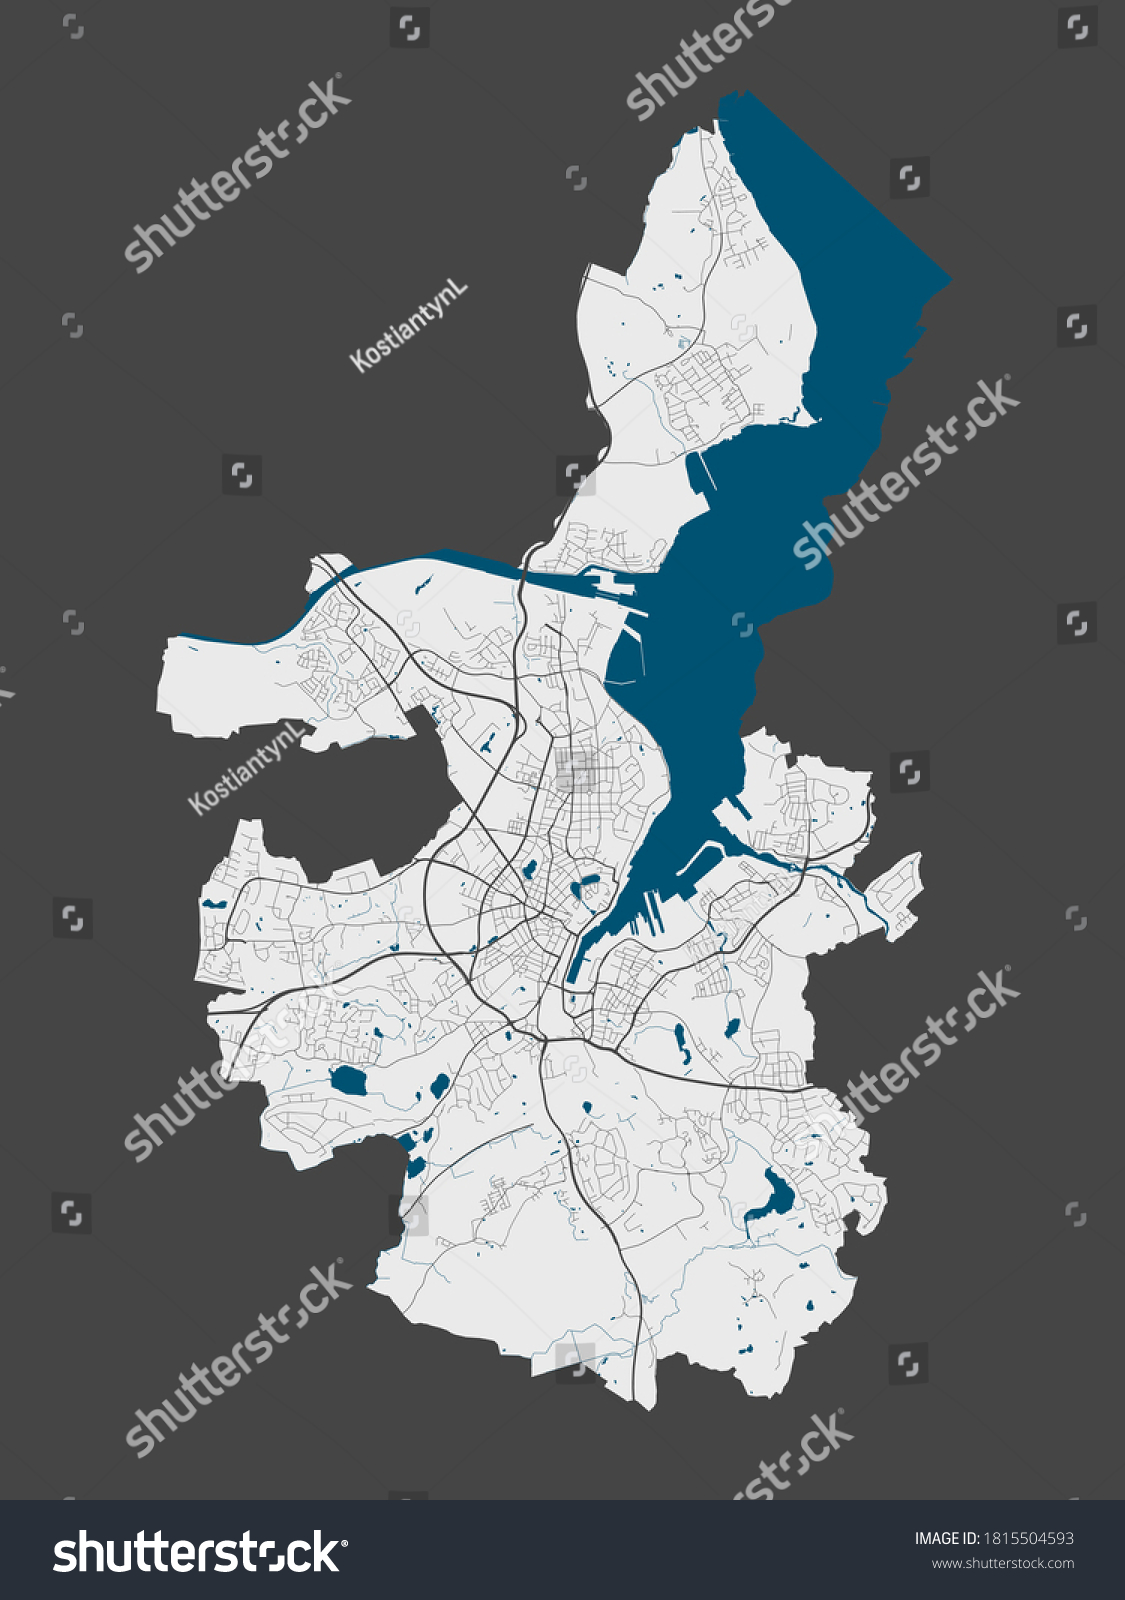 SVG of Kiel map. Detailed map of Kiel city administrative area. Cityscape panorama. Royalty free vector illustration. Outline map with highways, streets, rivers. Tourist decorative street map. svg